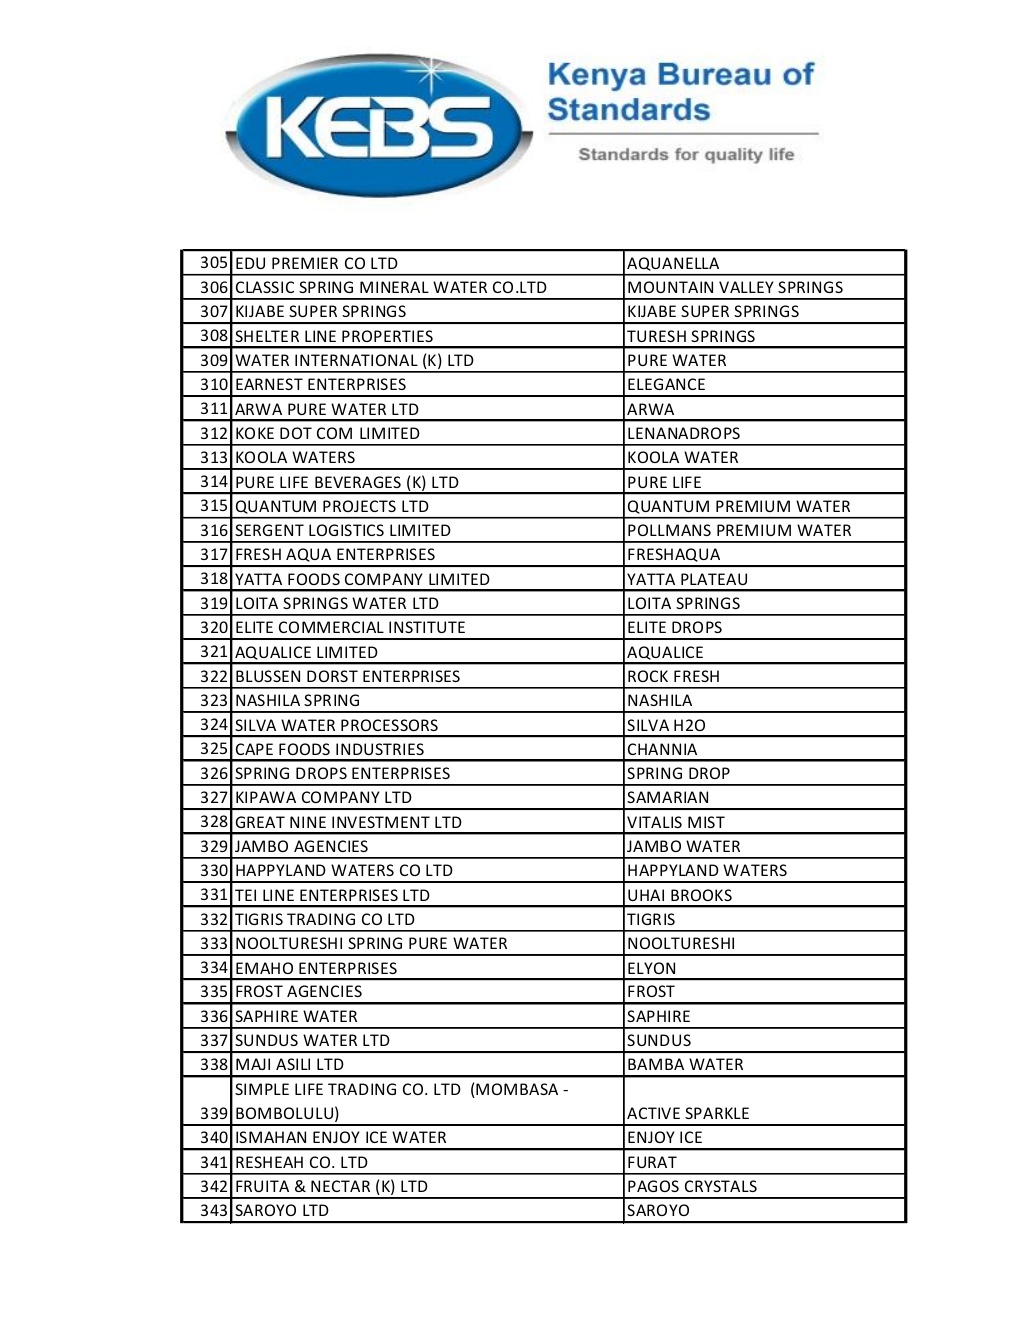 list-of-368-water-brands-banned-by-kebs-9-1024